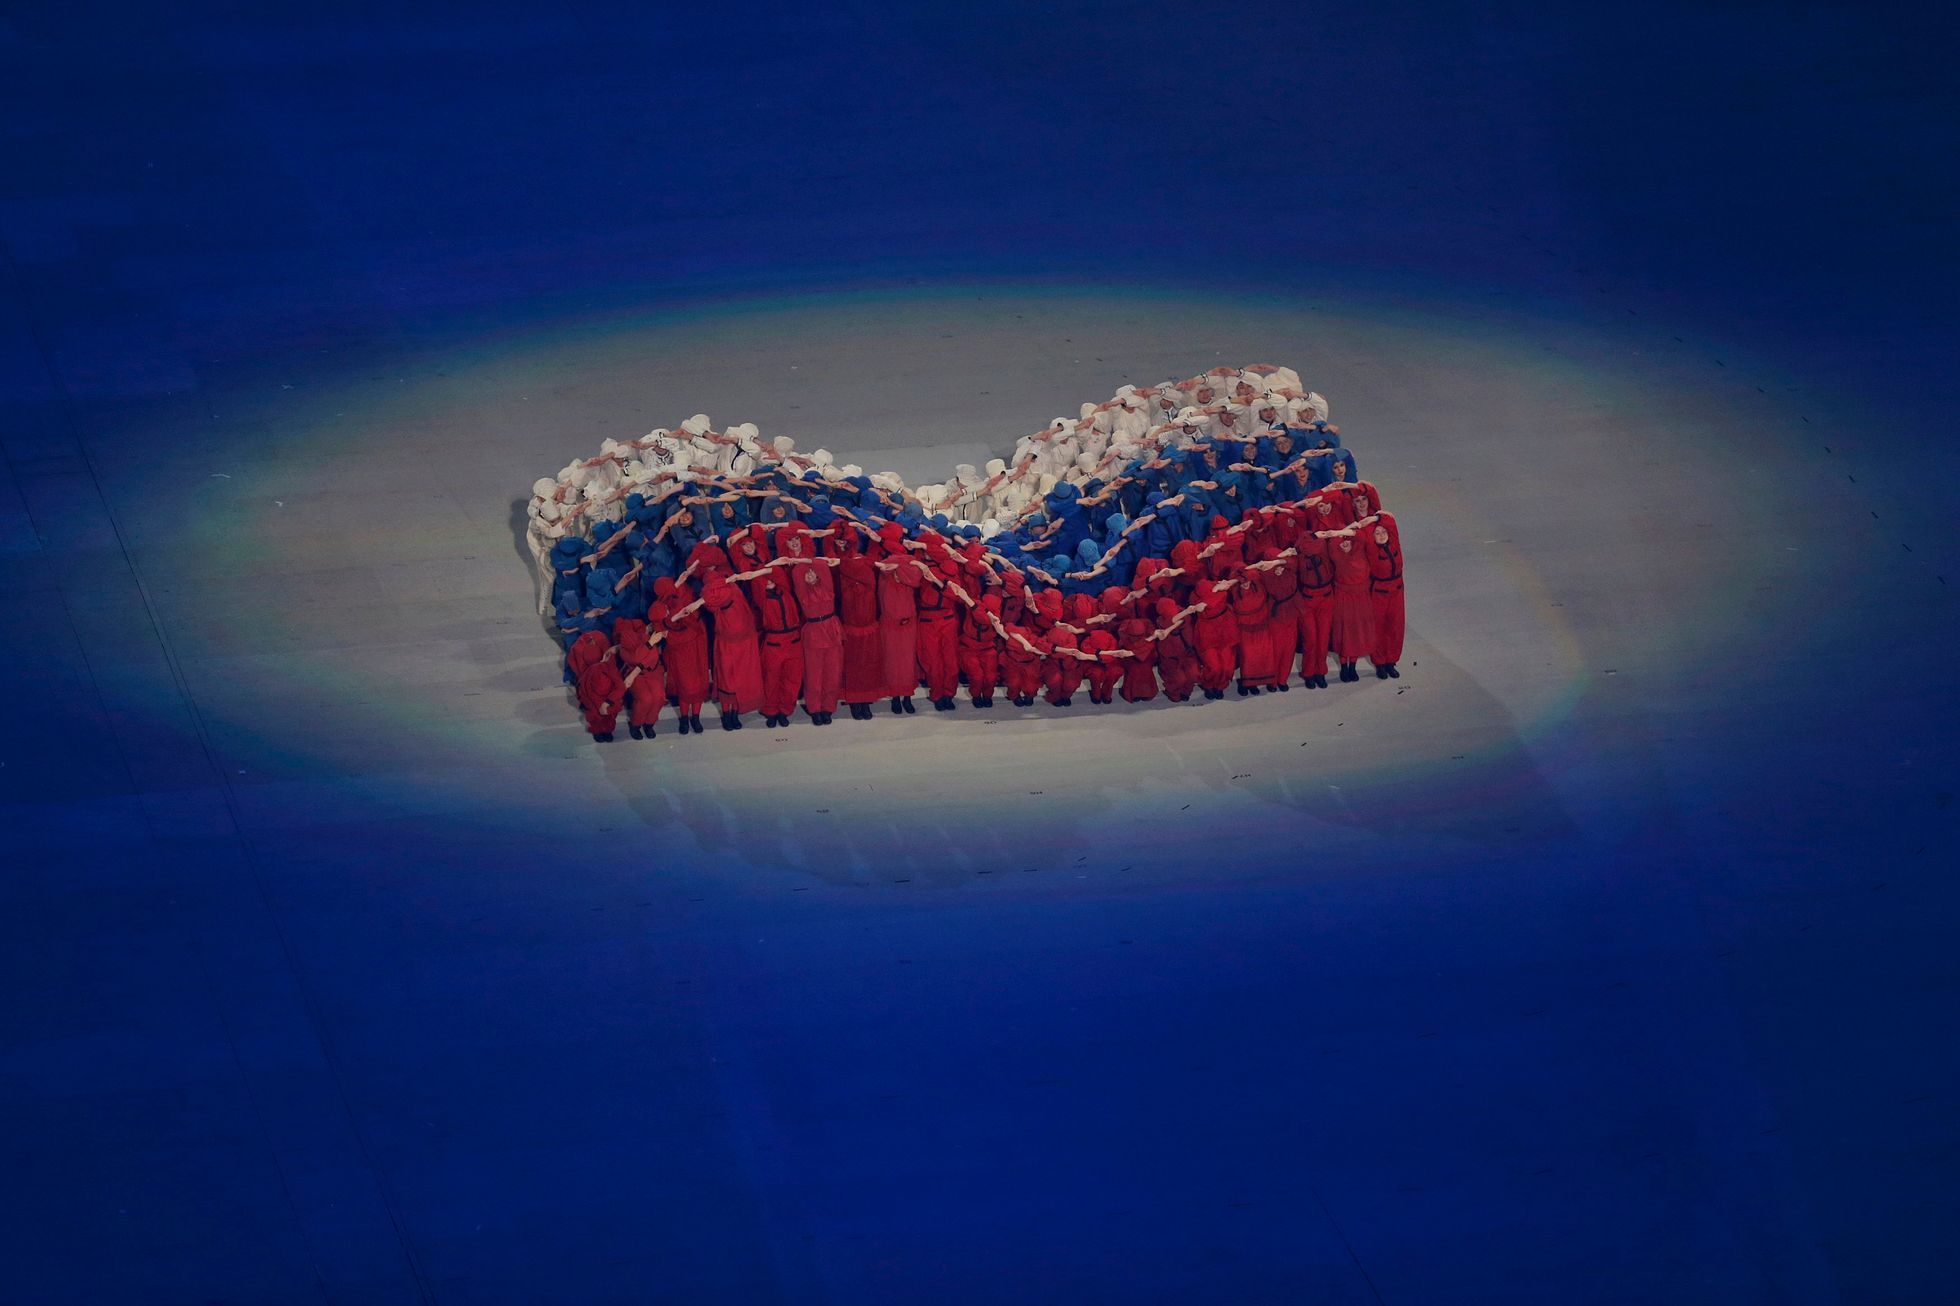 Performers take part in the opening ceremony of the 2014 Paralympic Winter Games in Sochi